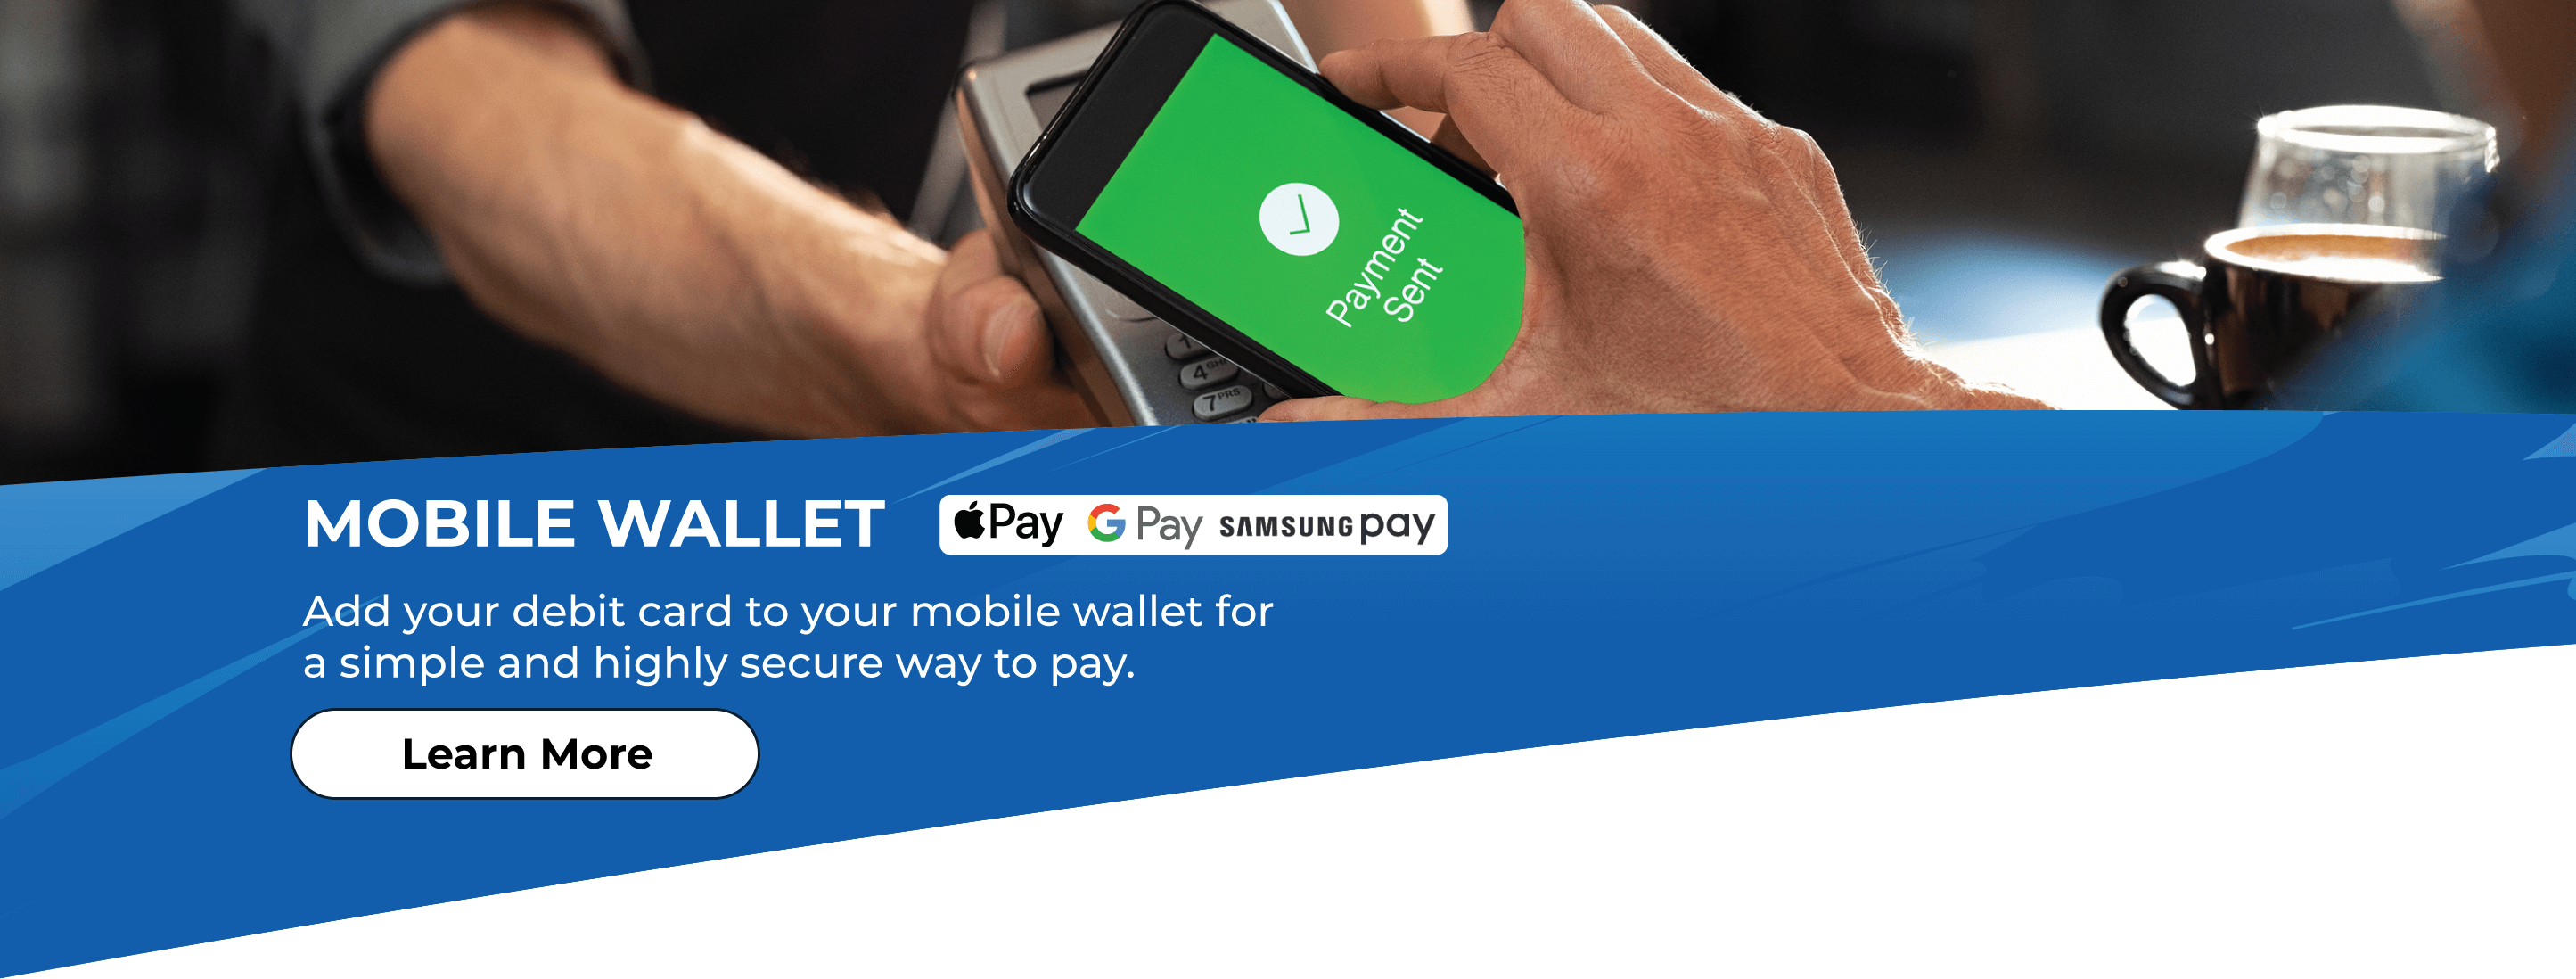 Mobile Wallet. Use your CCCU debit or credit card to pay on your phone